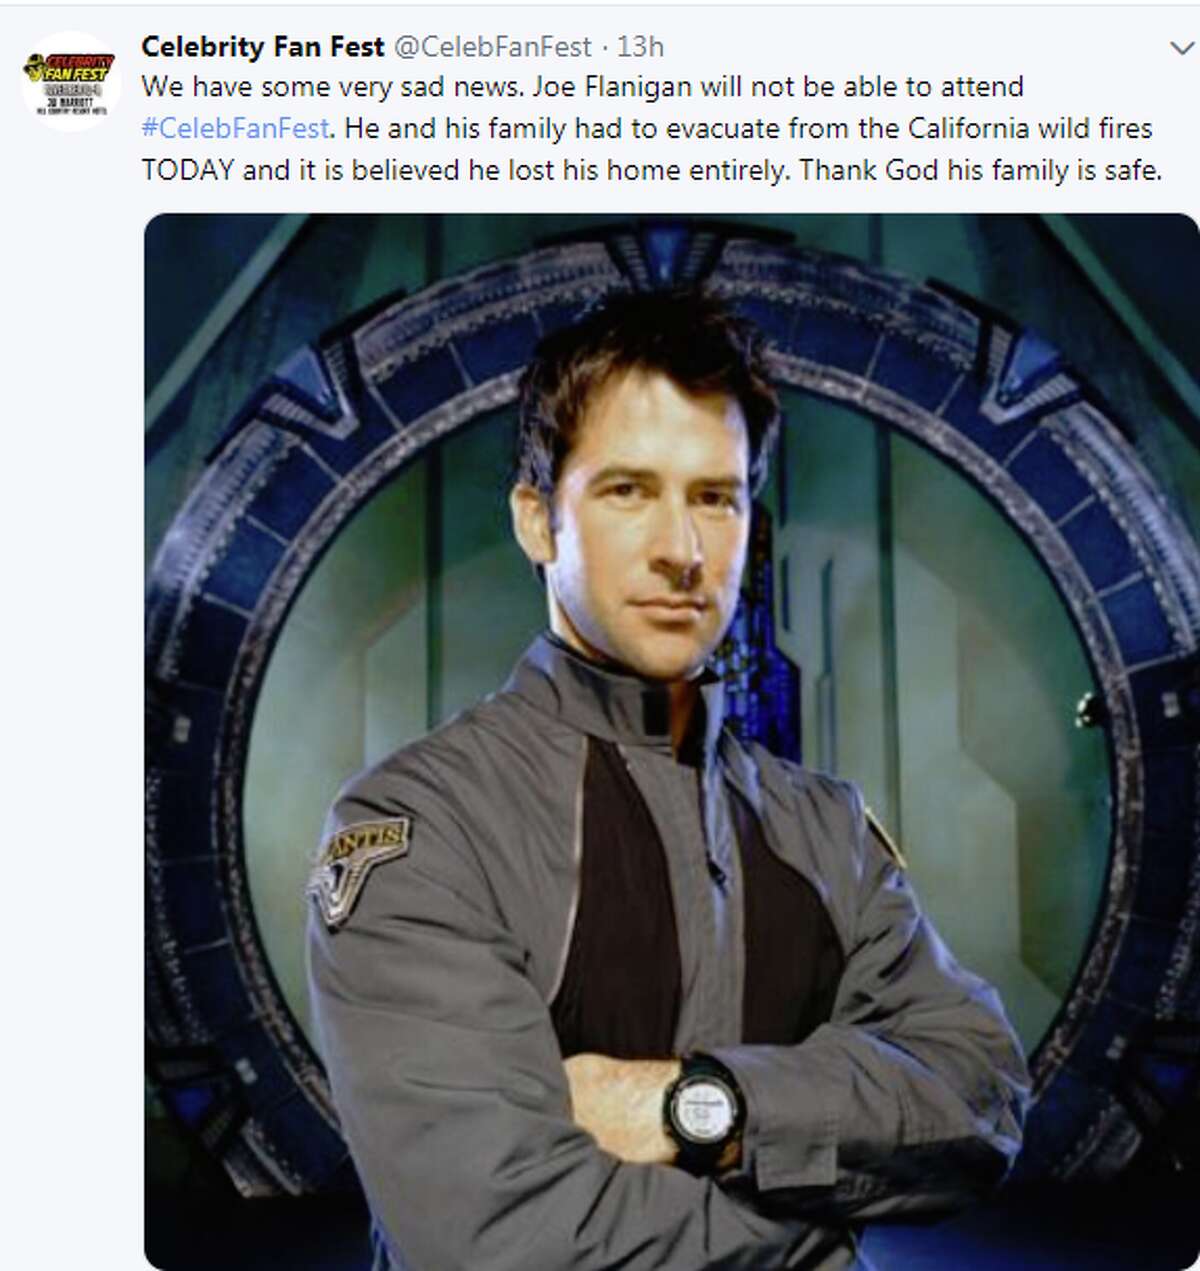 Joe Flanigan will not be attending Celebrity Fan Fest in San Antonio this weekend, the event announced on its social media pages.